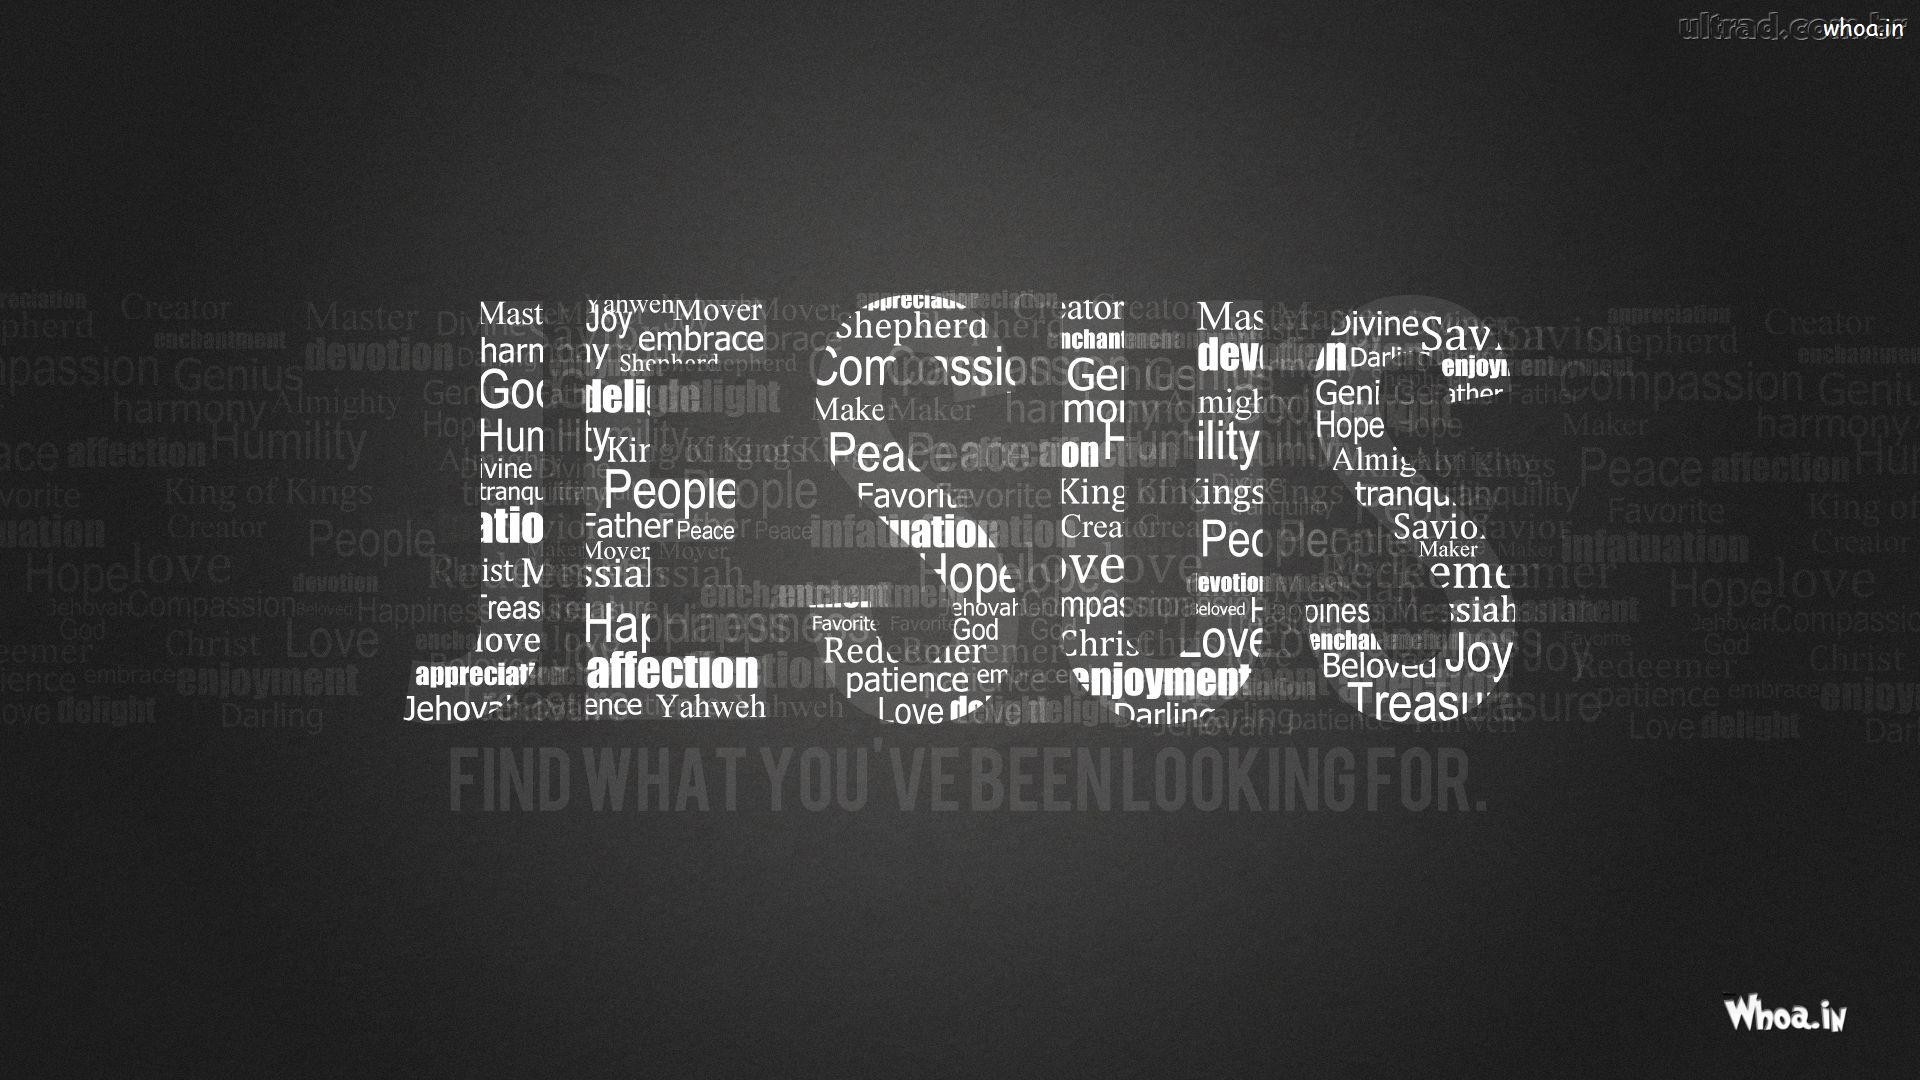 1920x1080 Jesus with Quote like Find what you have been Looking for Hd Wallpaper